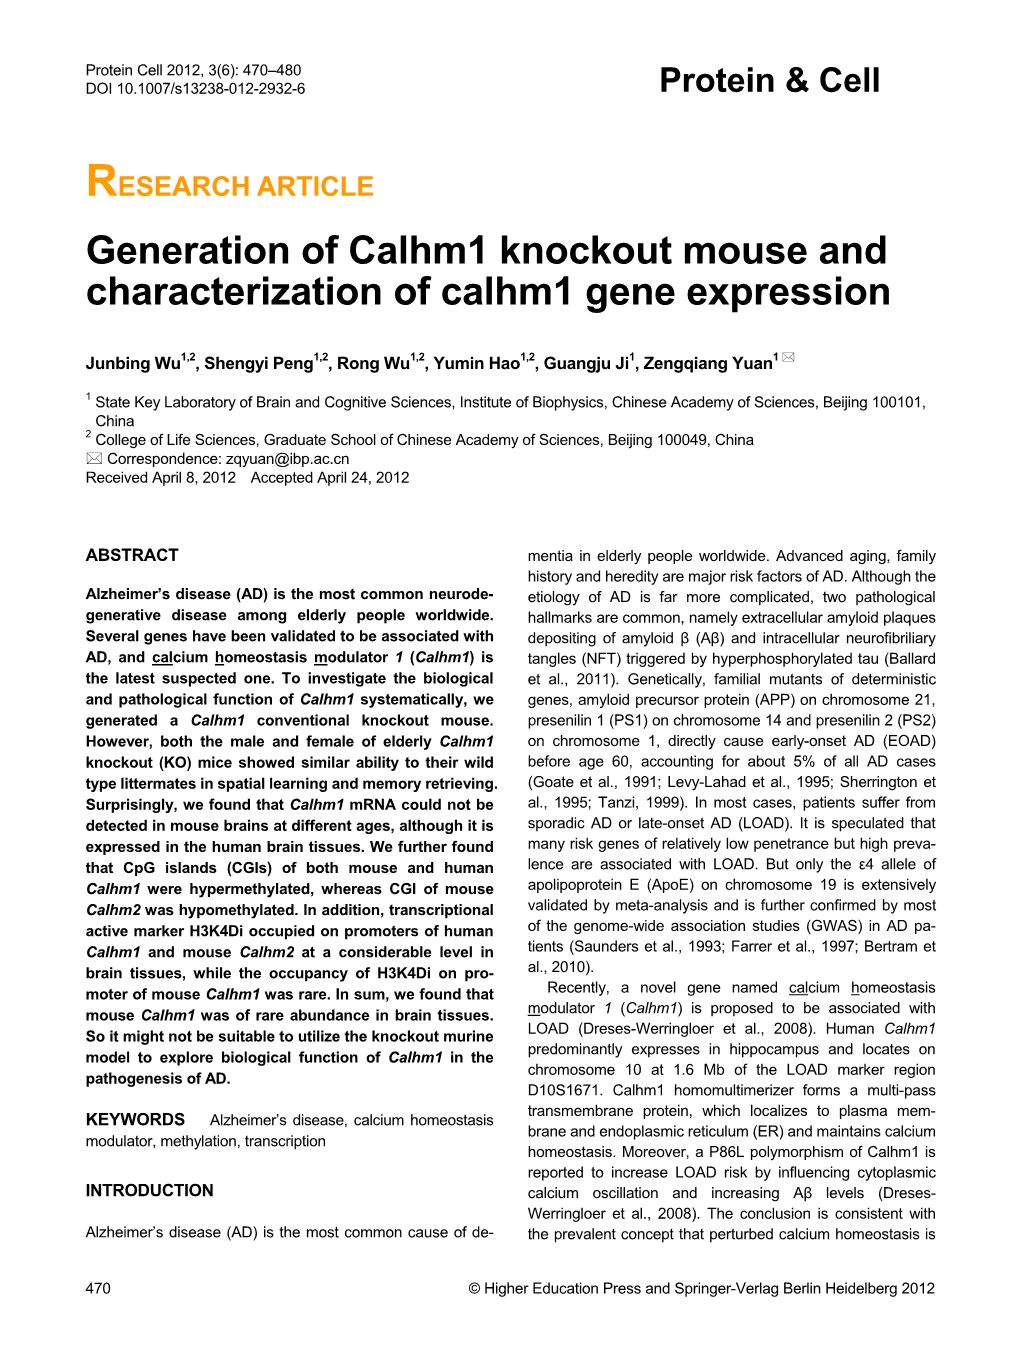 Generation of Calhm1 Knockout Mouse and Characterization of Calhm1 Gene Expression